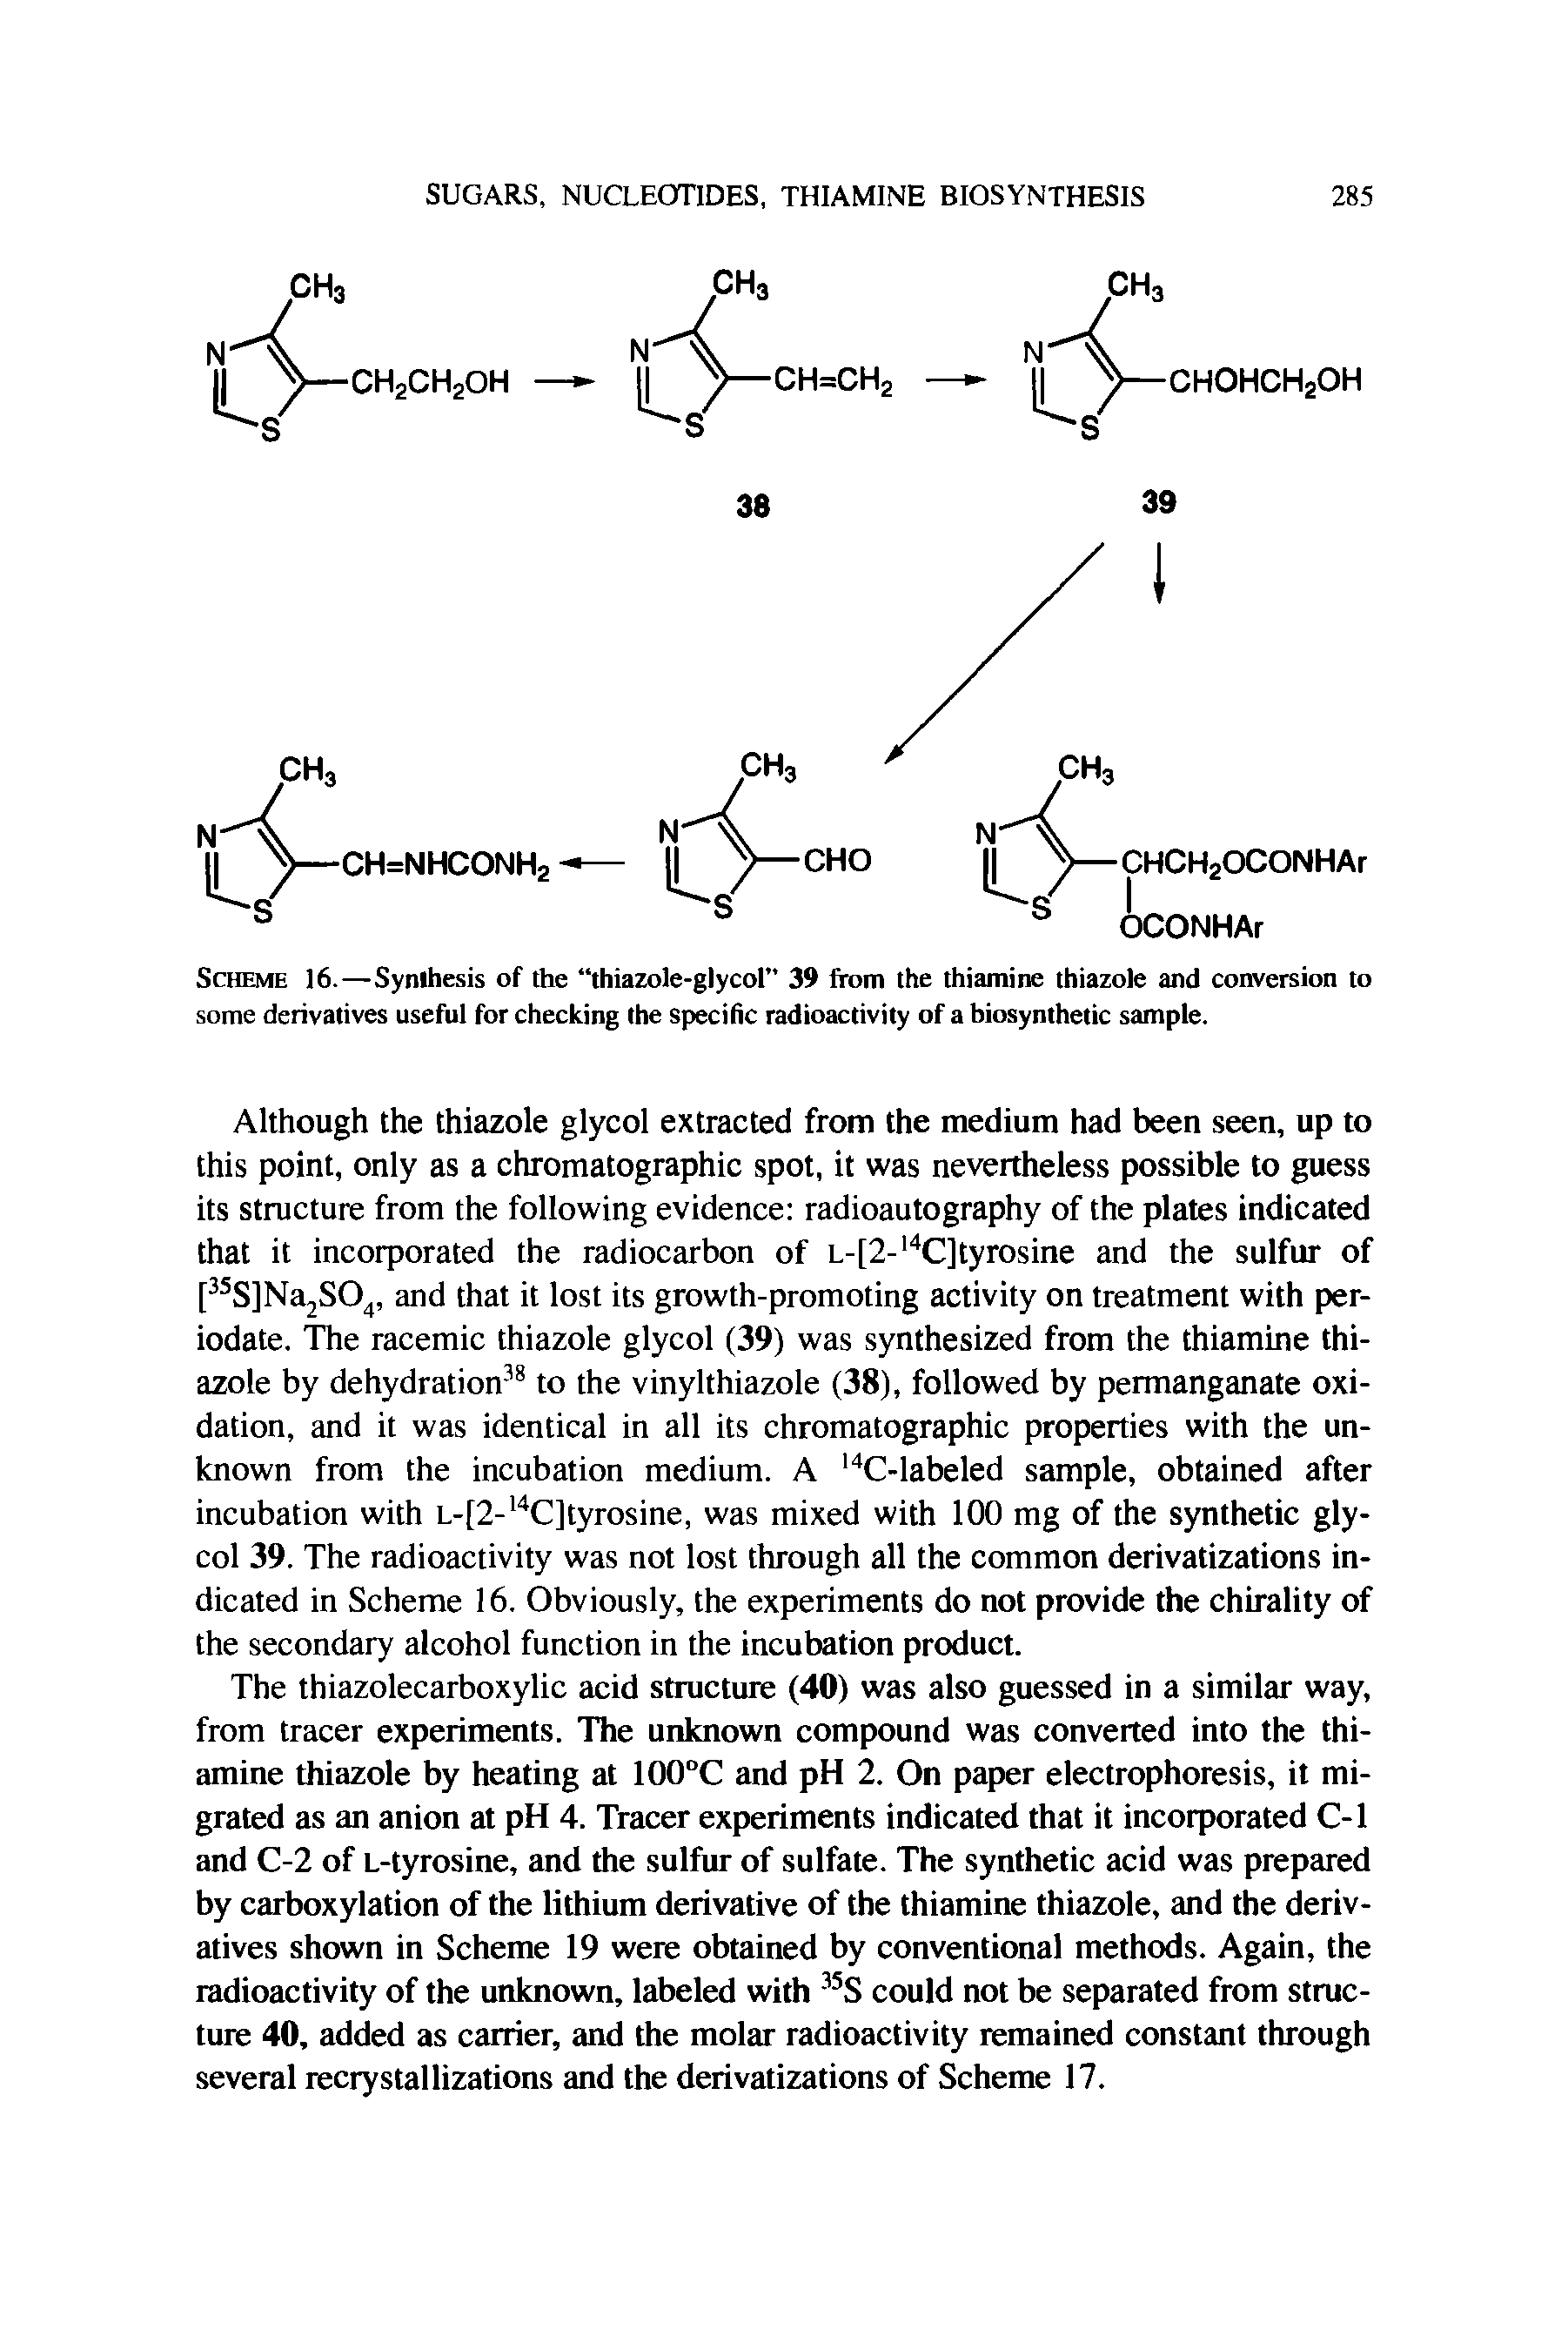 Scheme 16.—Synthesis of the thiazole-glycol 39 from the thiamine thiazole and conversion to some derivatives useful for checking the specific radioactivity of a biosynthetic sample.